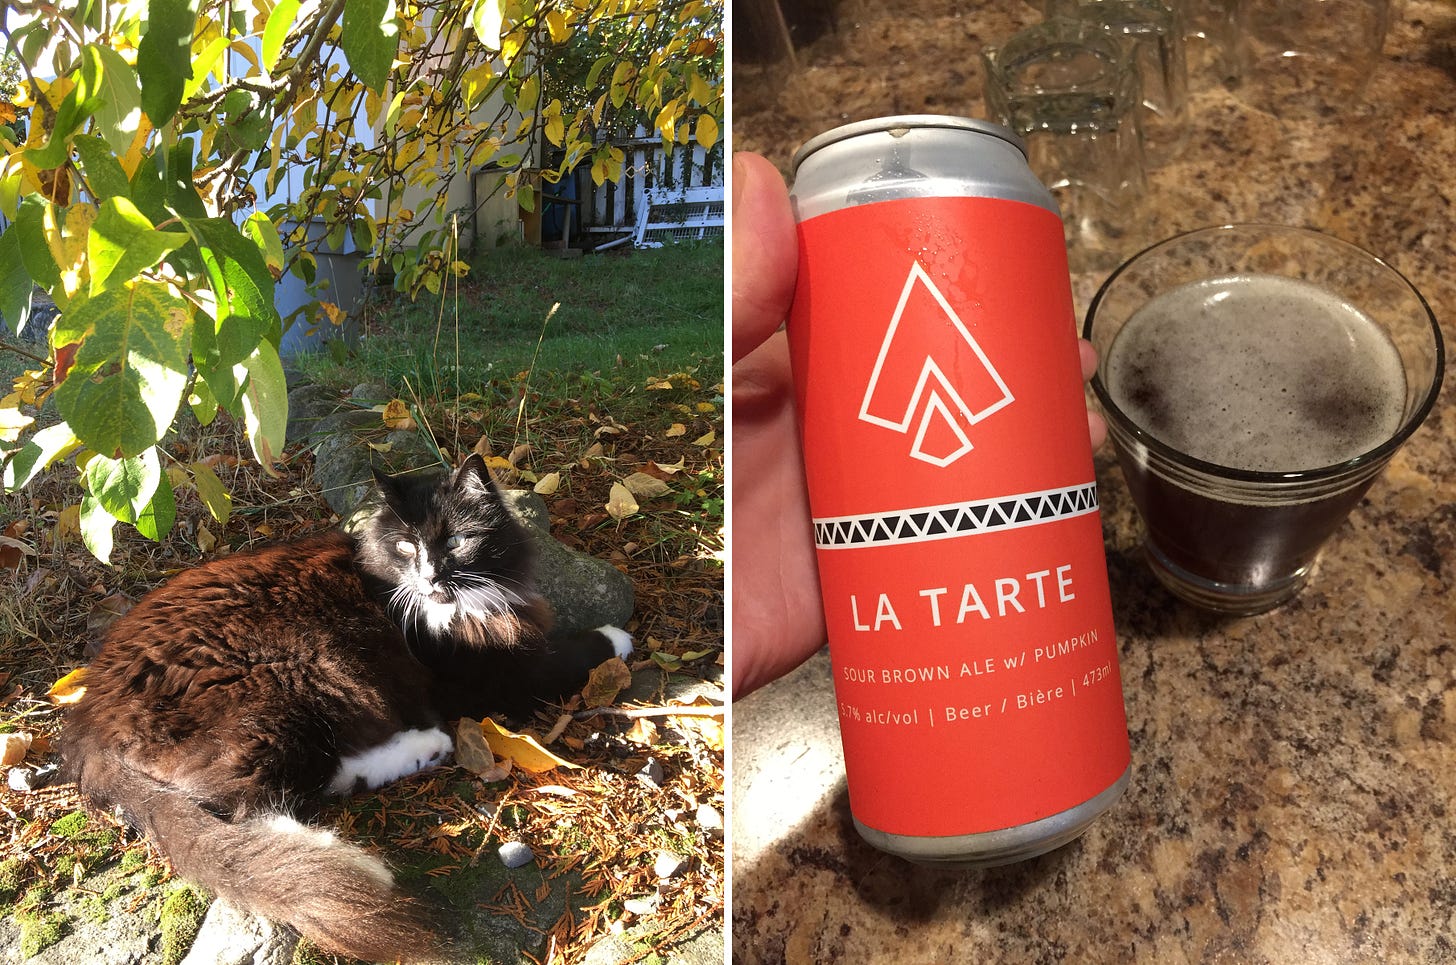 Left image: a fluffly black cat with white patches at his feet and chest lies on a leafy patch of grass under a tree. Right image: a pinkish-red can of beer with Ile Sauvage's logo at the top, and below it text reads 'LA TARTE sour brown ale with pumpkin' in front of a glass of the dark brown beer.